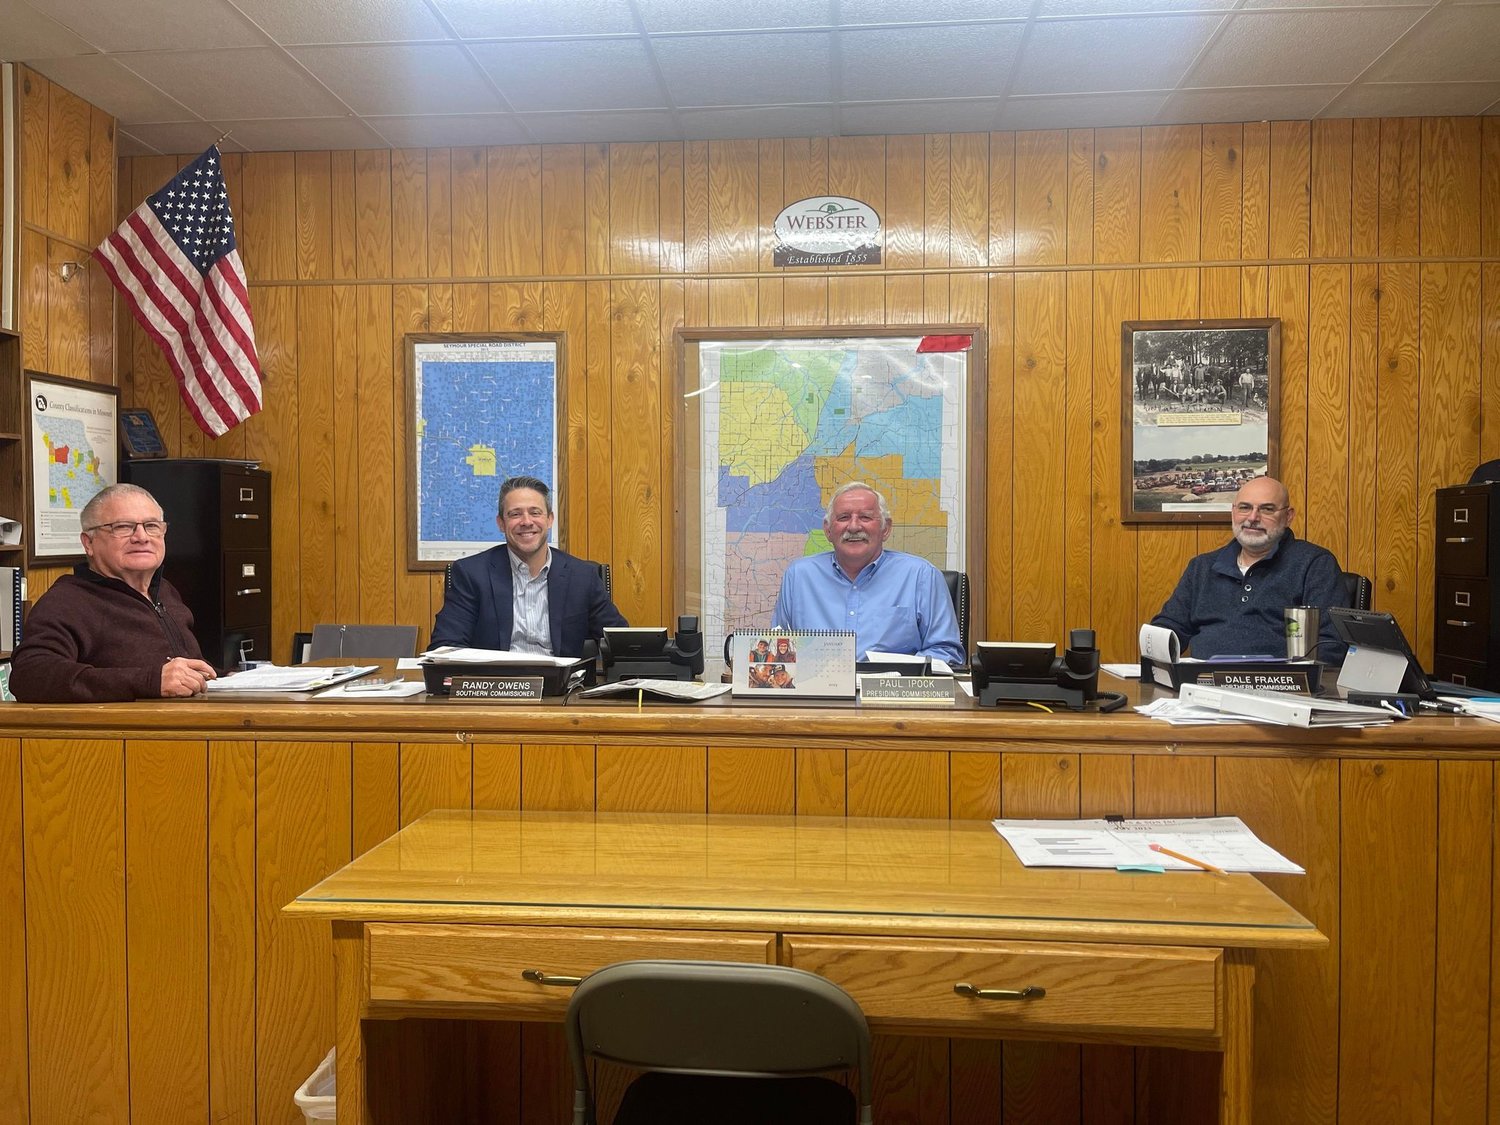 Pictured left to right: Southern Commissioner Randy Owens, Prosecuting Attorney Ben Berkstresser, Presiding Commissioner Paul Ipock, Northern Commissioner Dale Fraker and County Clerk Stanley Whitehurst.